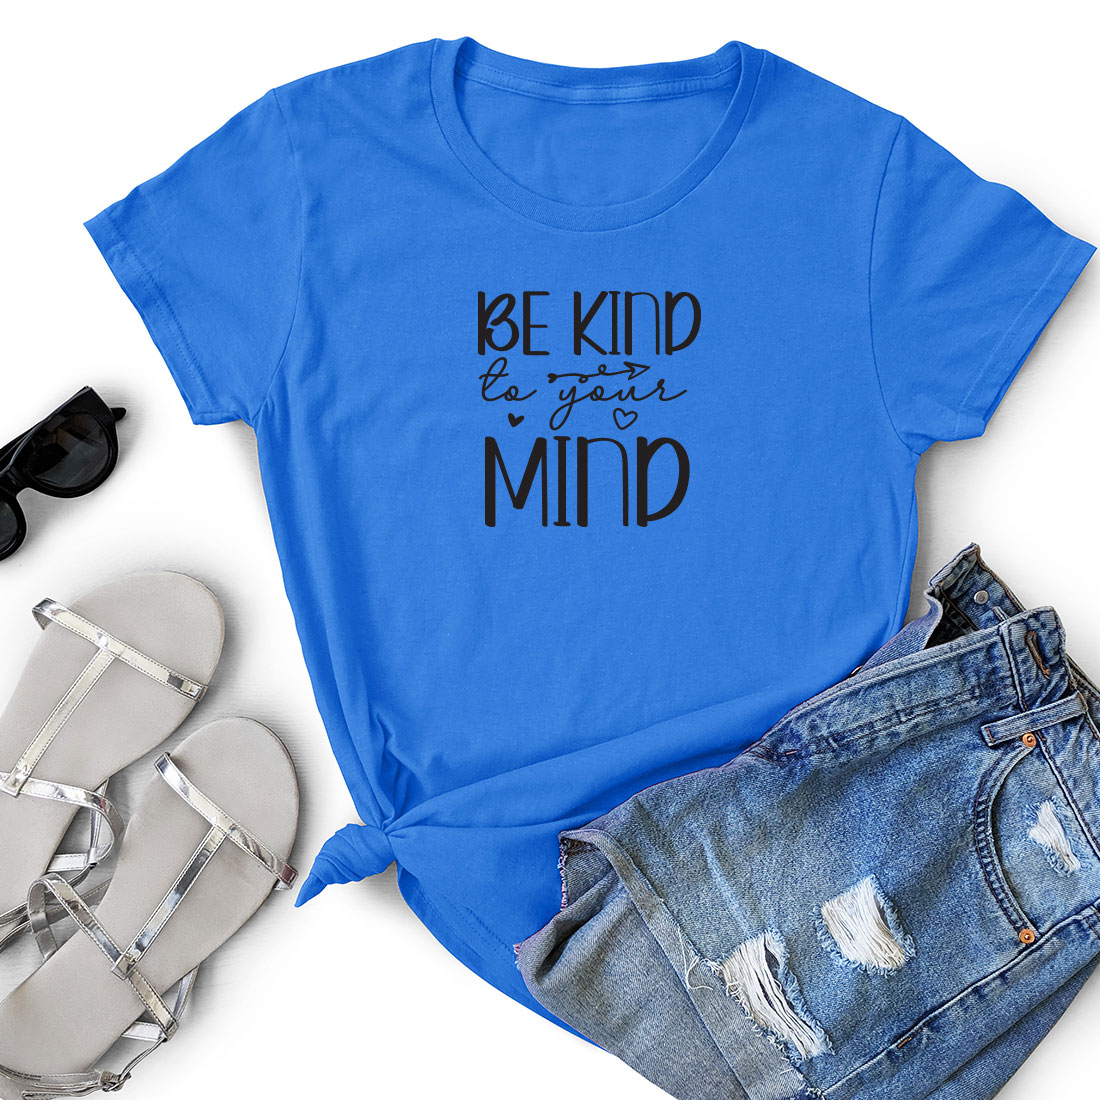 T - shirt that says be kind of a great mind.